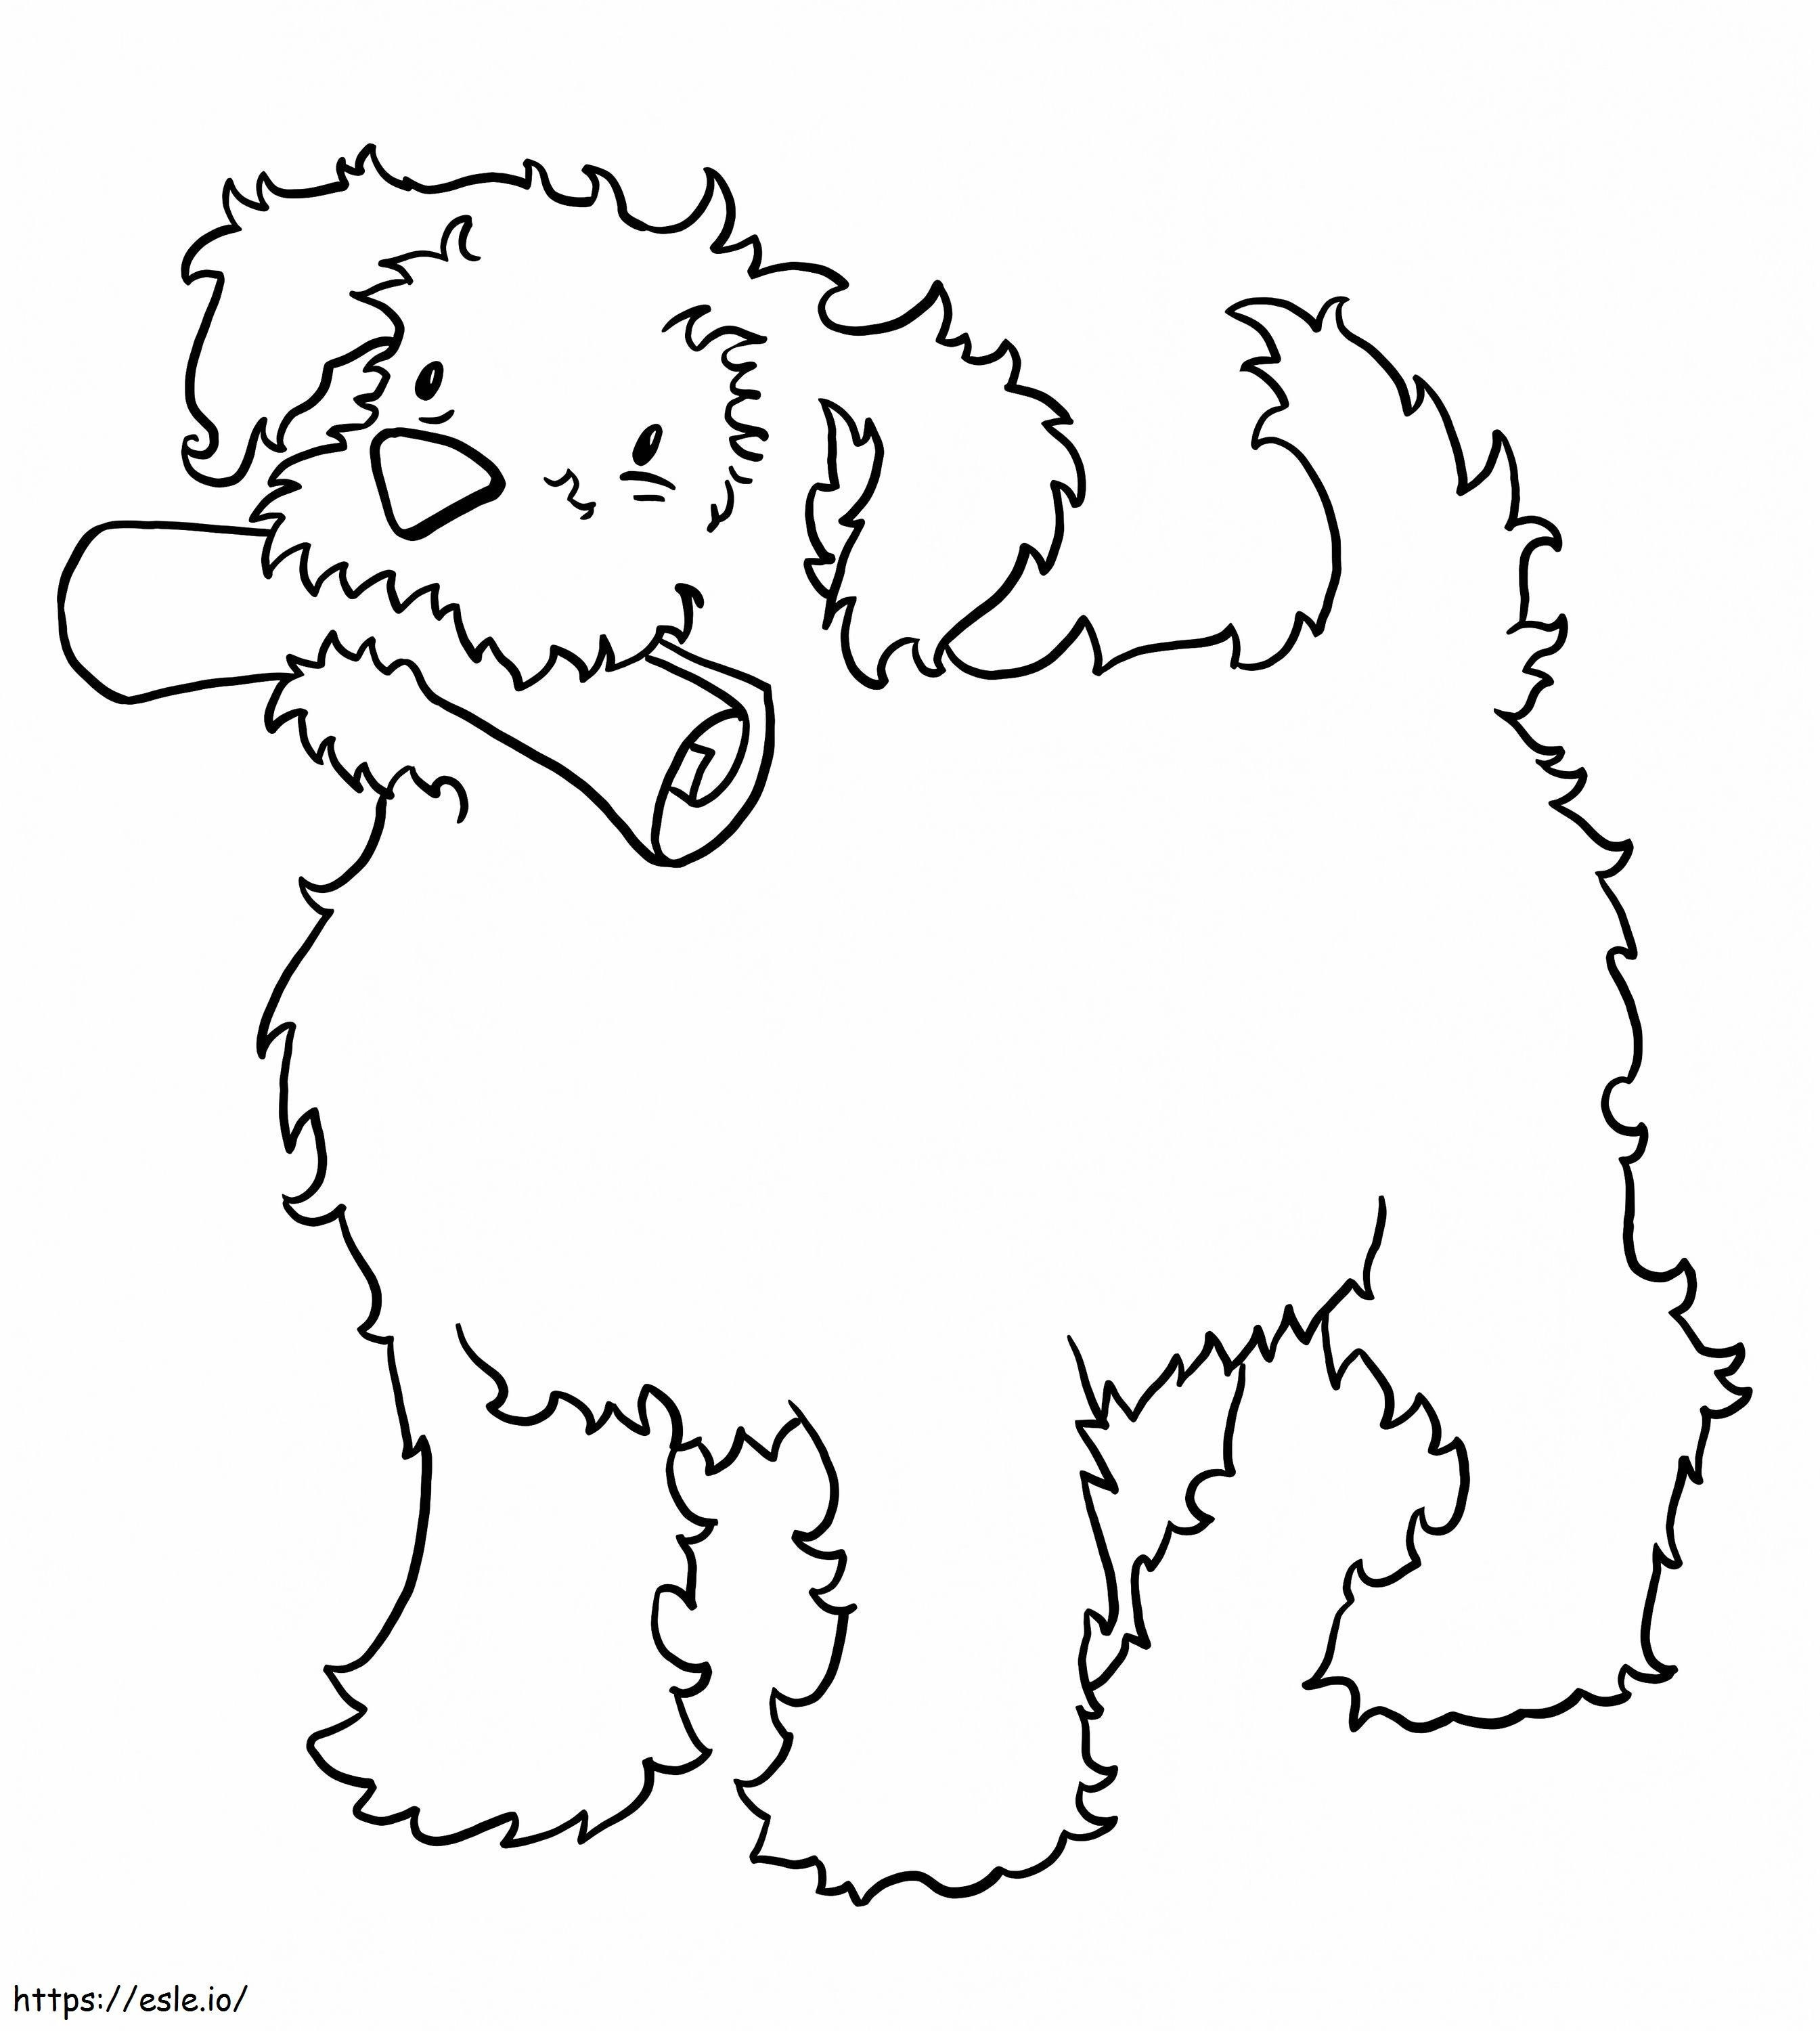 Puppy 3 coloring page